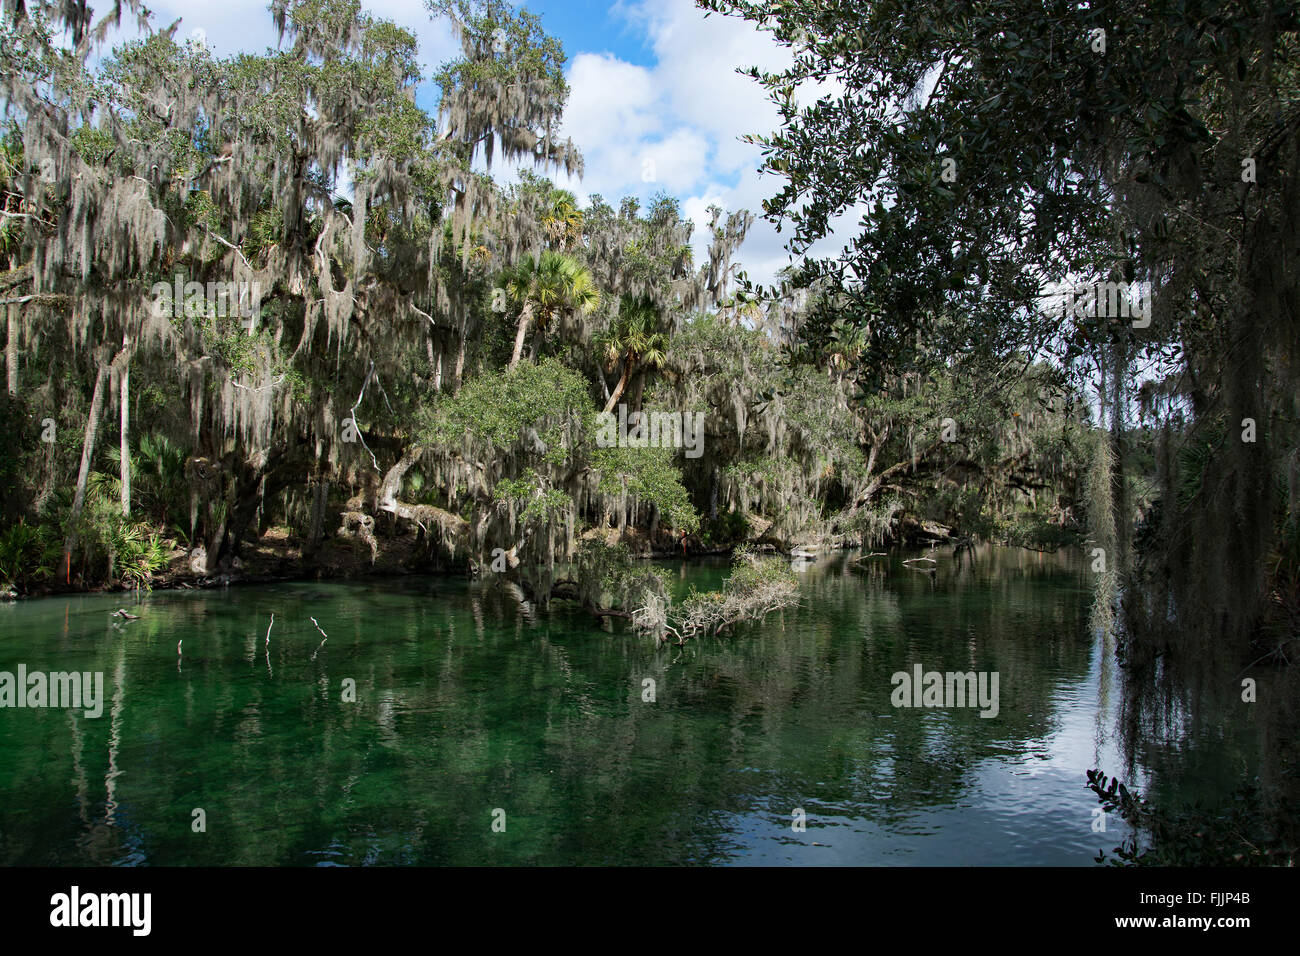 Blue Spring State Park is a state park located west of Orange City, Florida in the United States and serves as the winter home o Stock Photo